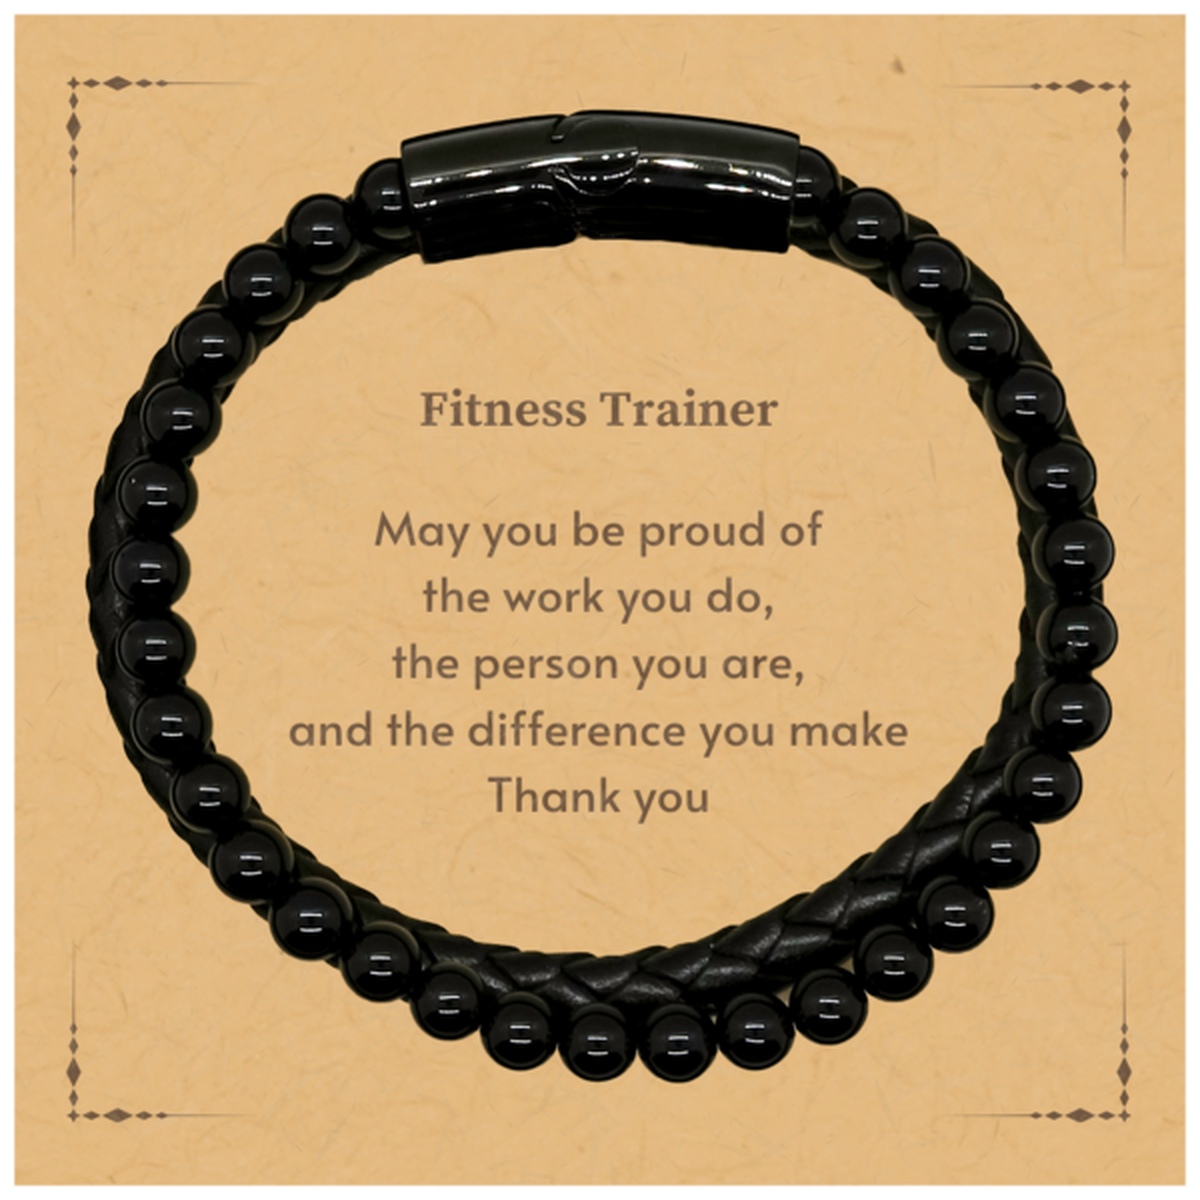 Heartwarming Stone Leather Bracelets Retirement Coworkers Gifts for Fitness Trainer, Fitness Trainer May You be proud of the work you do, the person you are Gifts for Boss Men Women Friends